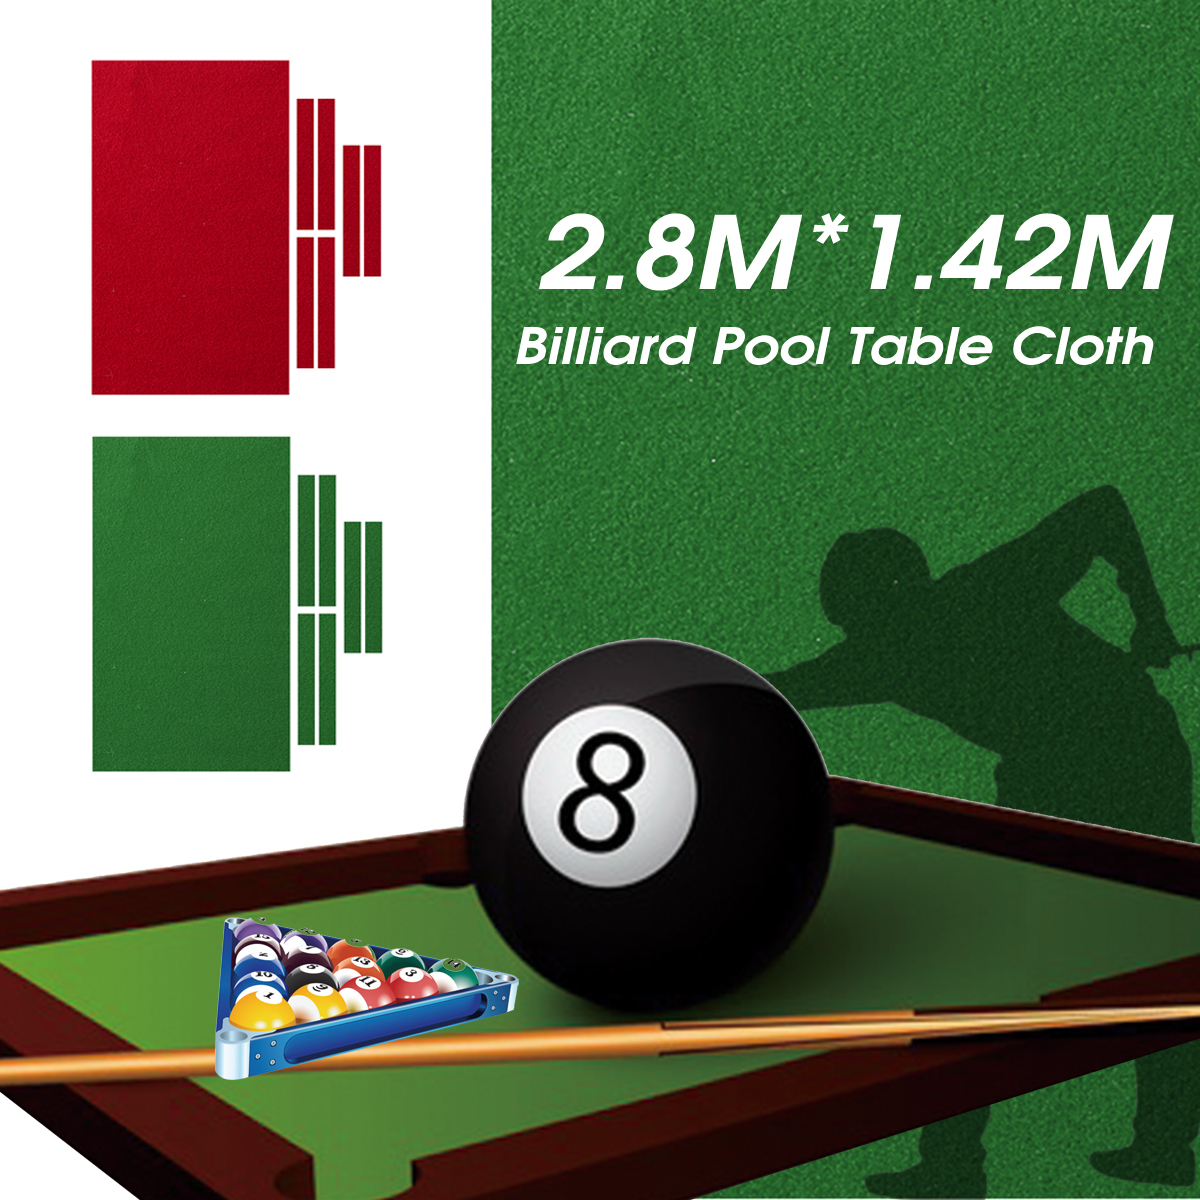 Billiard Snooker Pool Table Cover Tablecloth Baize Protector Worsted Felt 305 